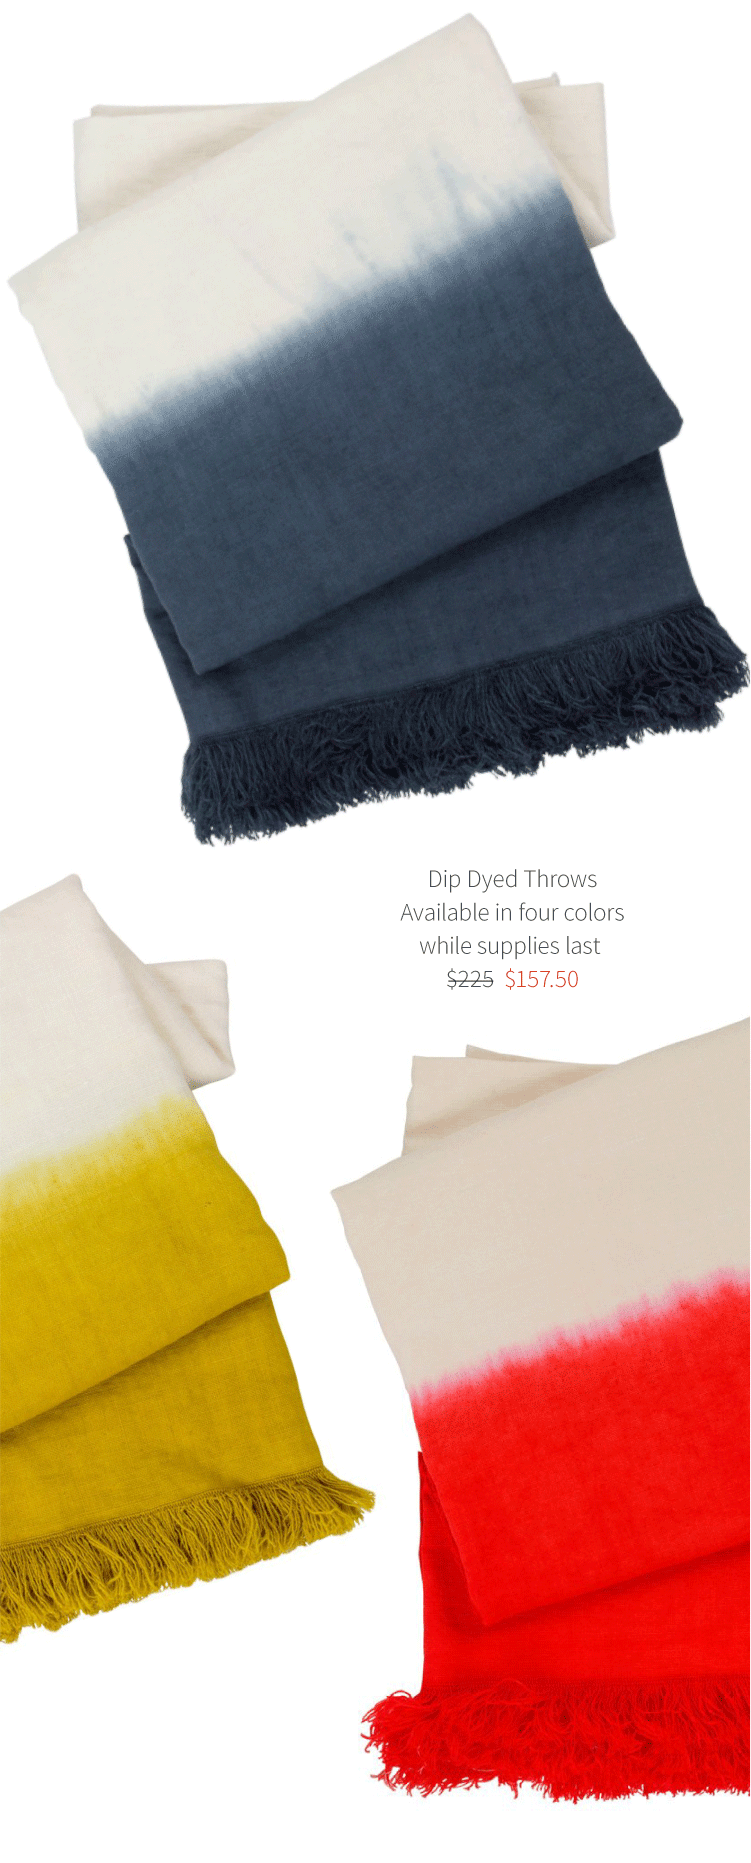 Dip Dyed Throws. Available in four colors while supplies last. $157.50